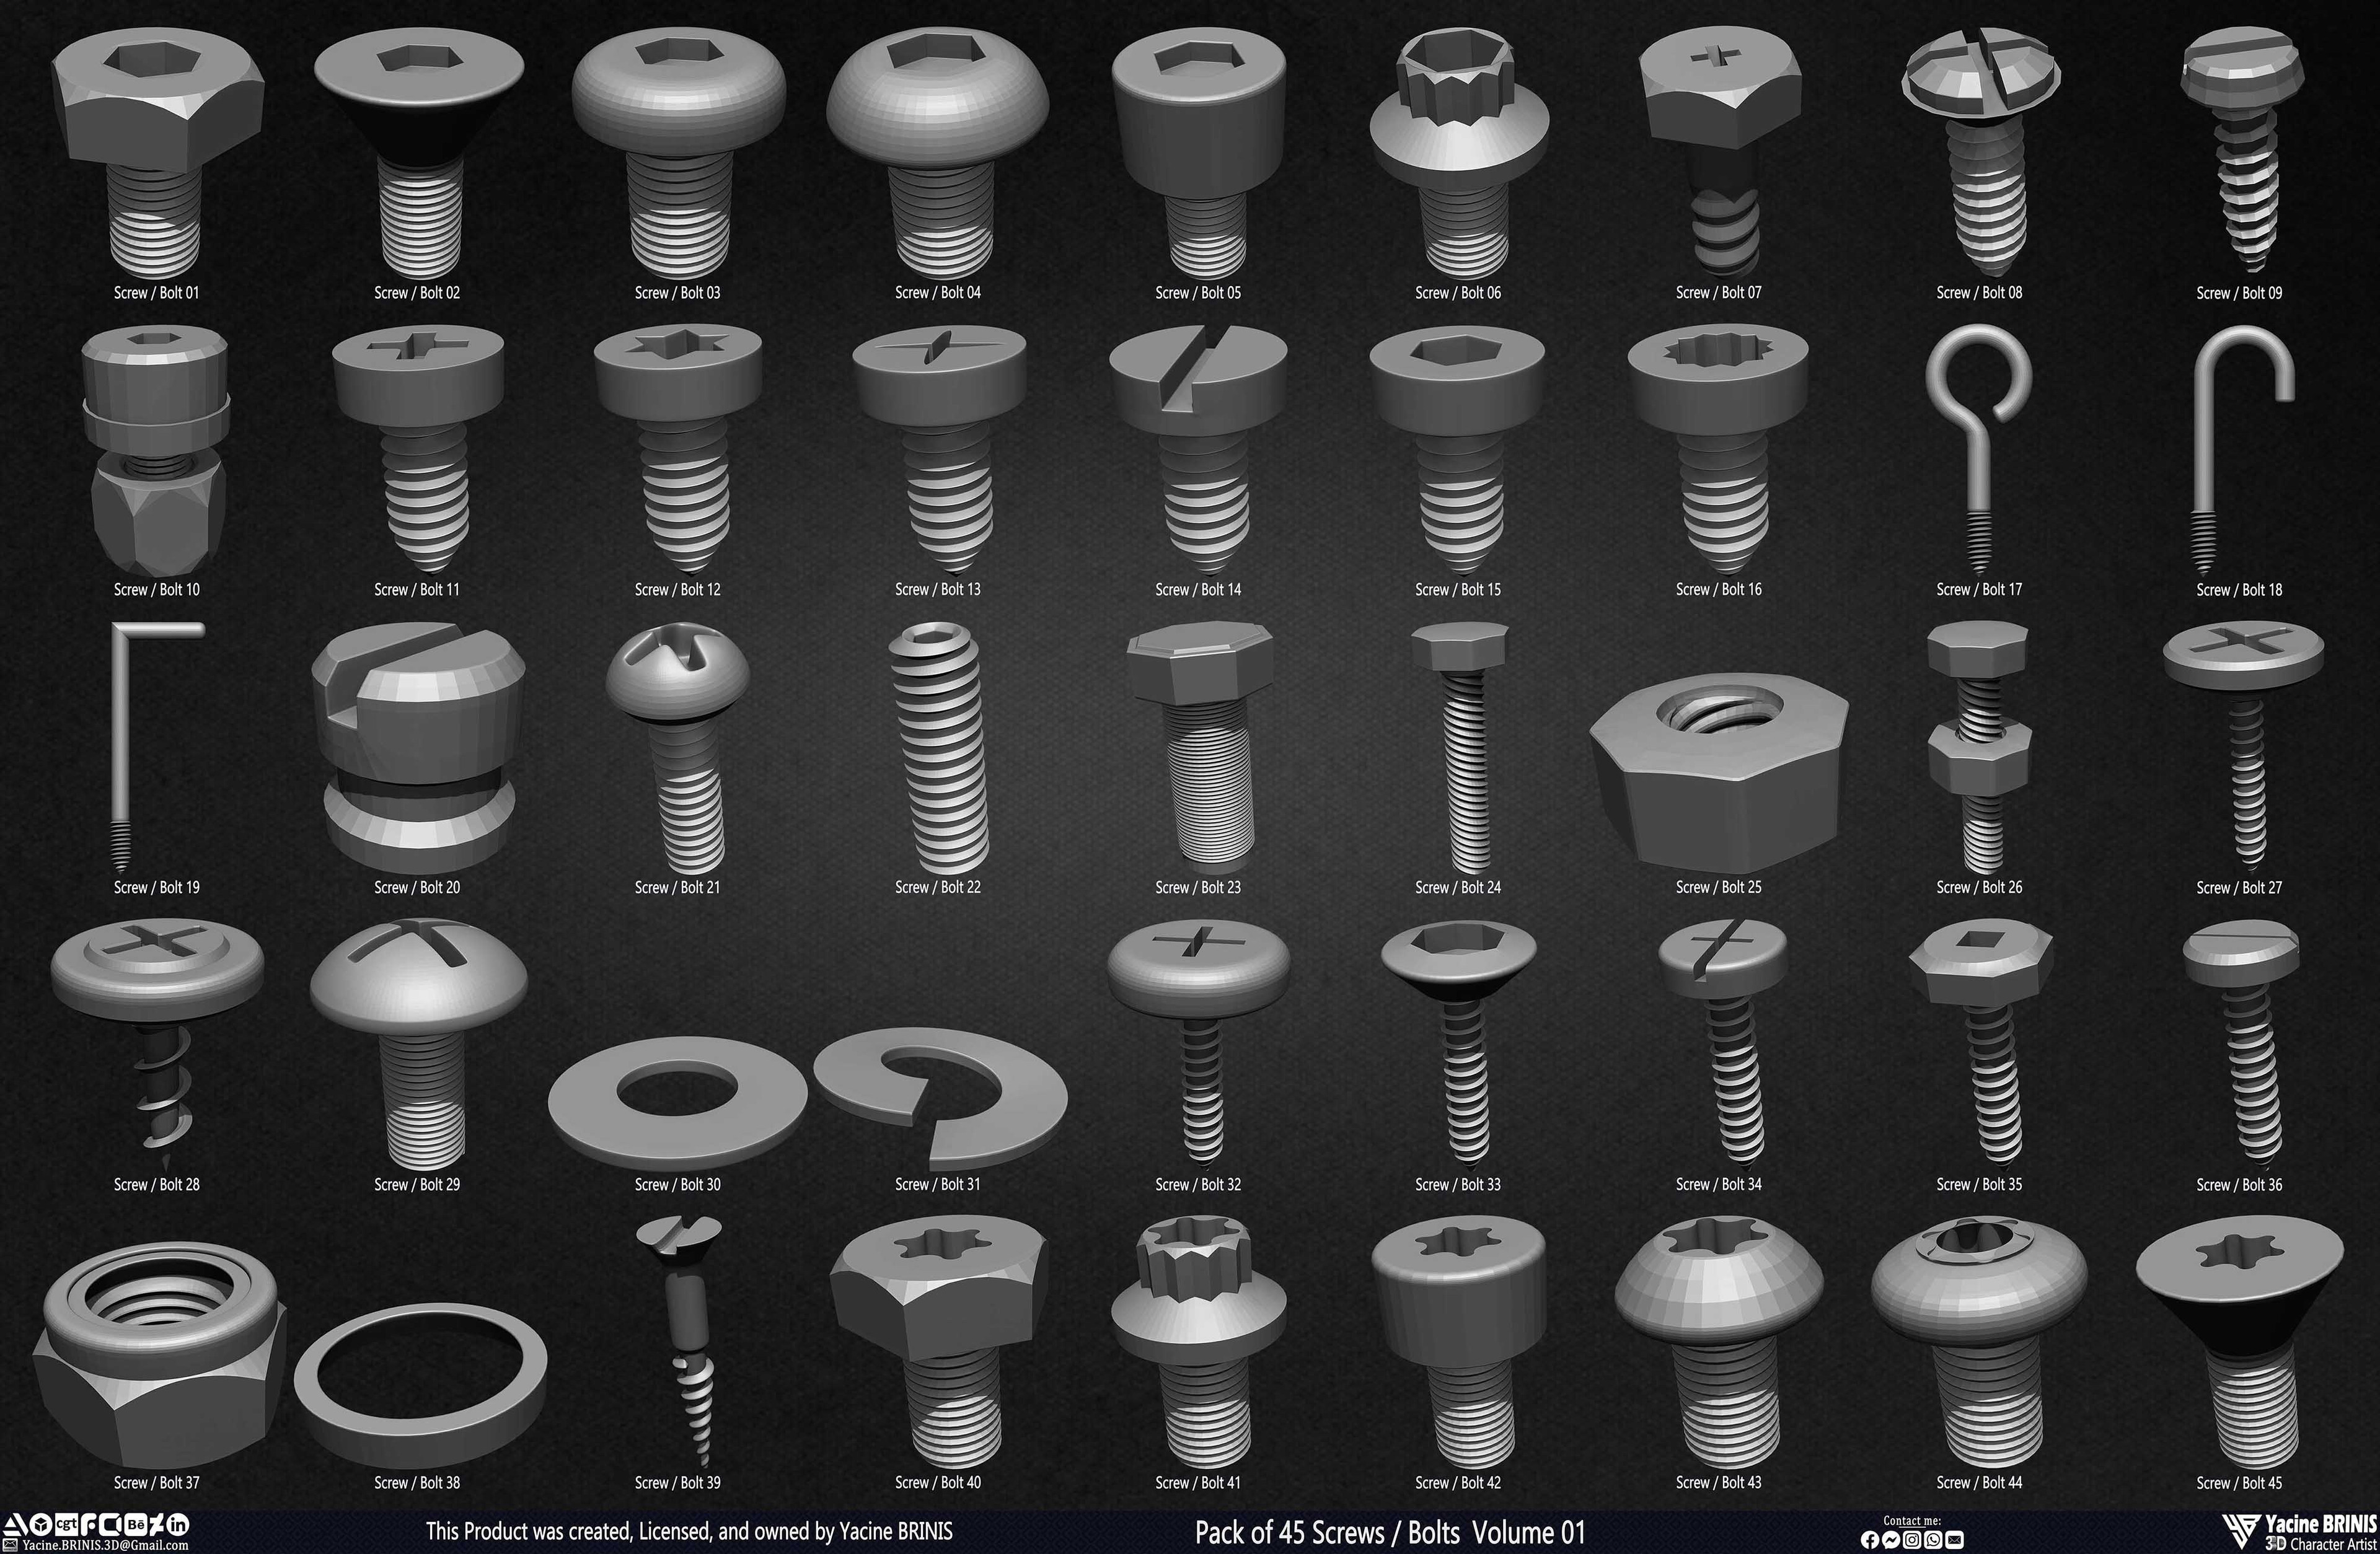 Pack of 45 Screws-Bolts Volume 01 Sculpted By Yacine BRINIS Set 002